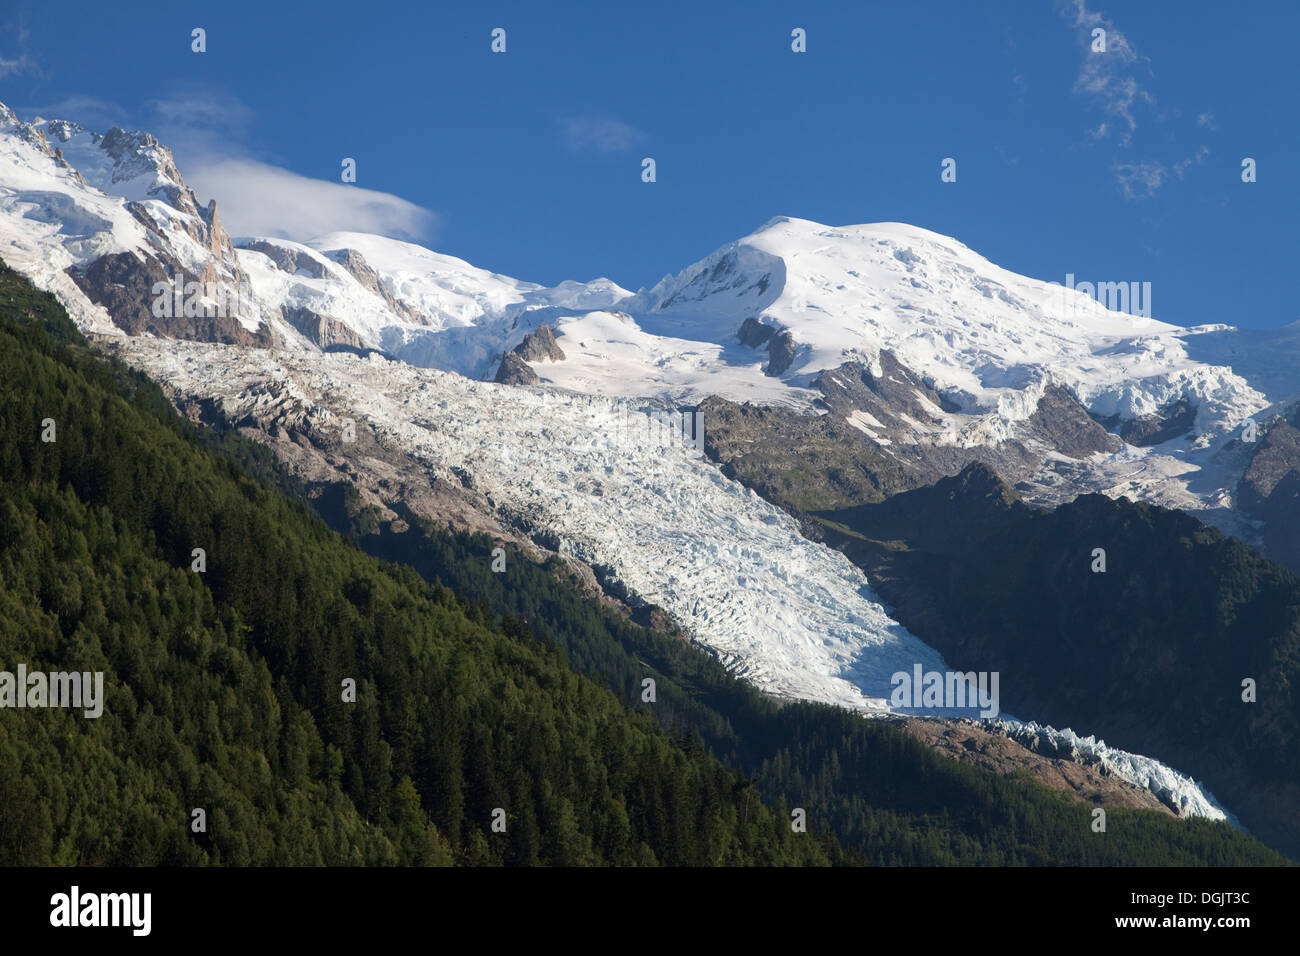 Mont Blanc, Dome du Gouter and Bossons Glacier from Chamonix, Haute-Savoie, France. Stock Photo